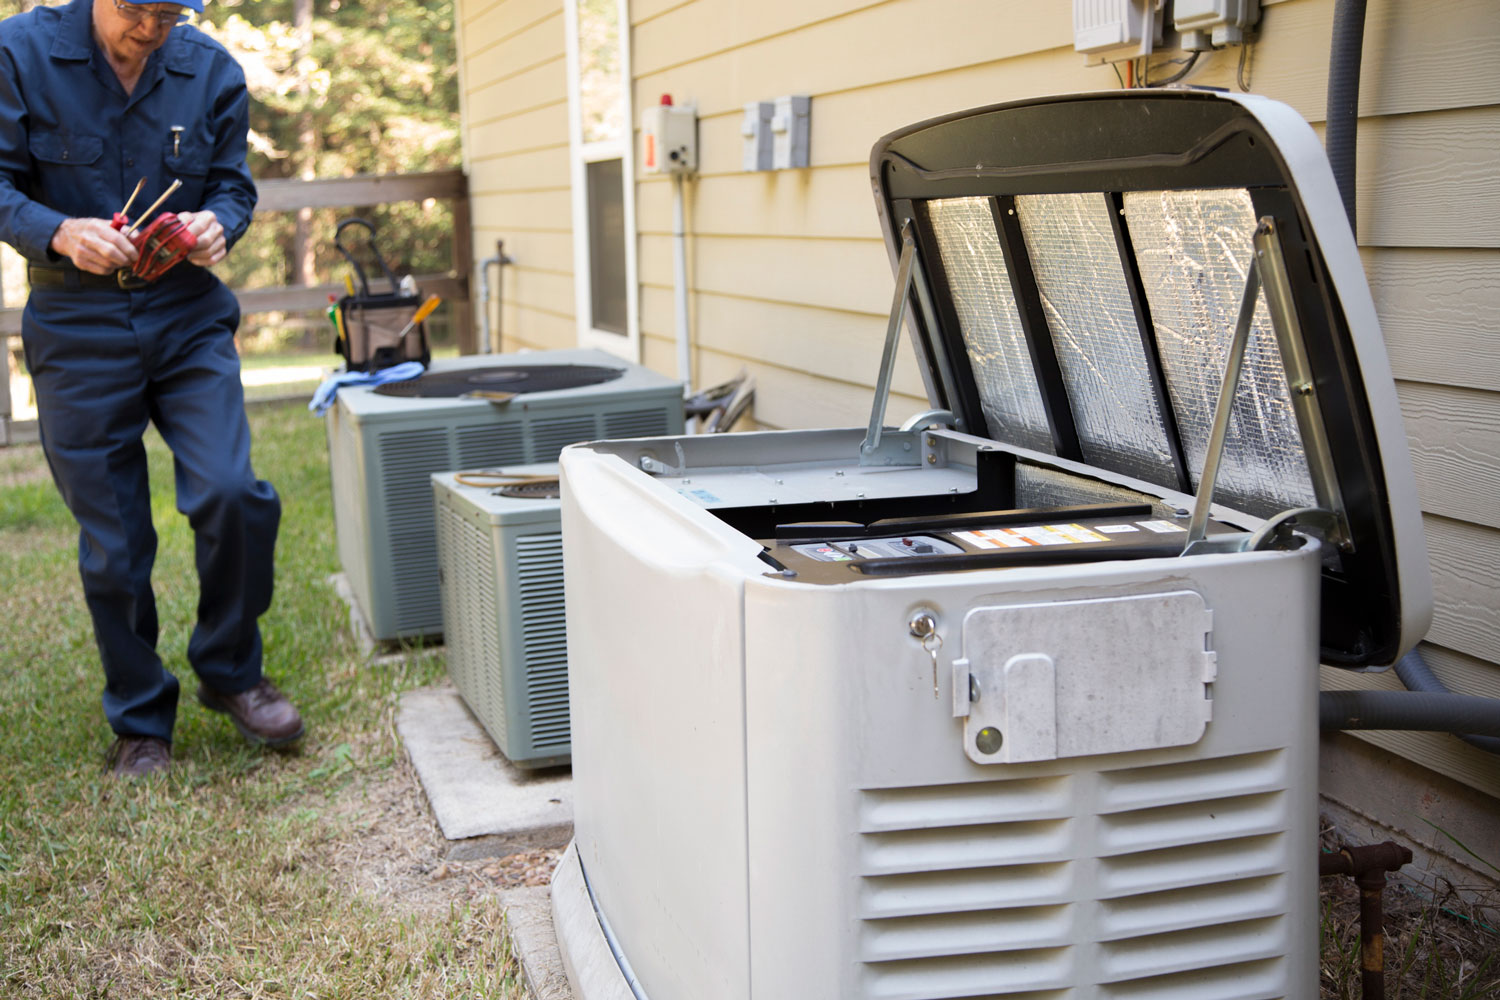 Senior Adult air conditioner Technician/Electrician services outdoor AC unit and the Gas Generator, Can A Generator Run An Electric Furnace?